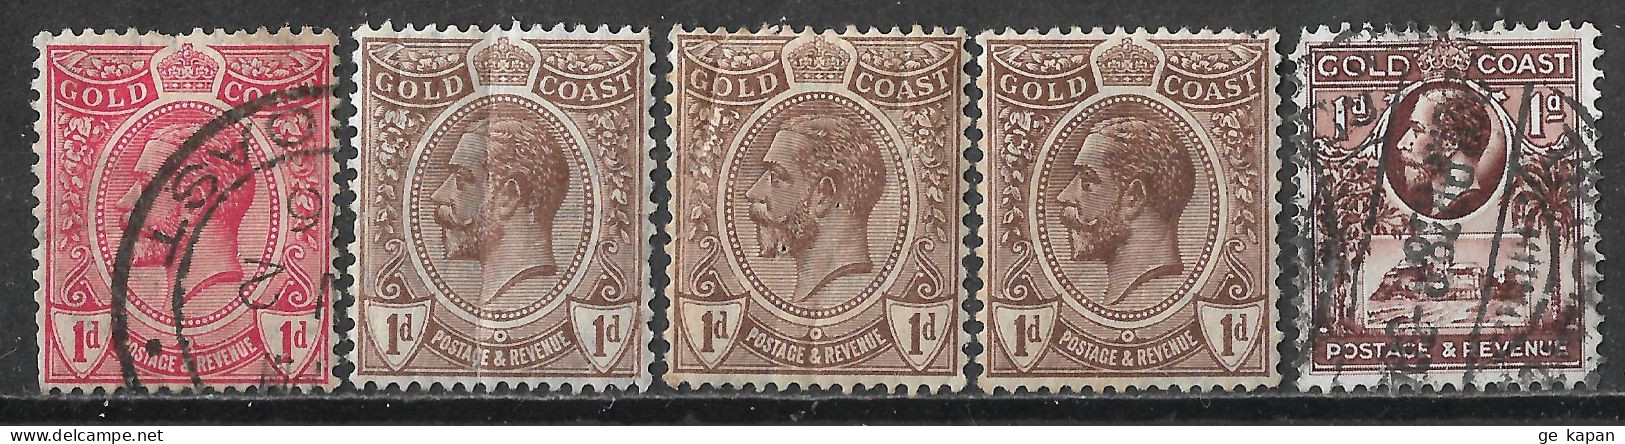 1913-1928 GOLD COAST SET OF 2 USED + 3 MNH STAMPS (Michel # 63a.76.89) CV €2.90 - Côte D'Or (...-1957)